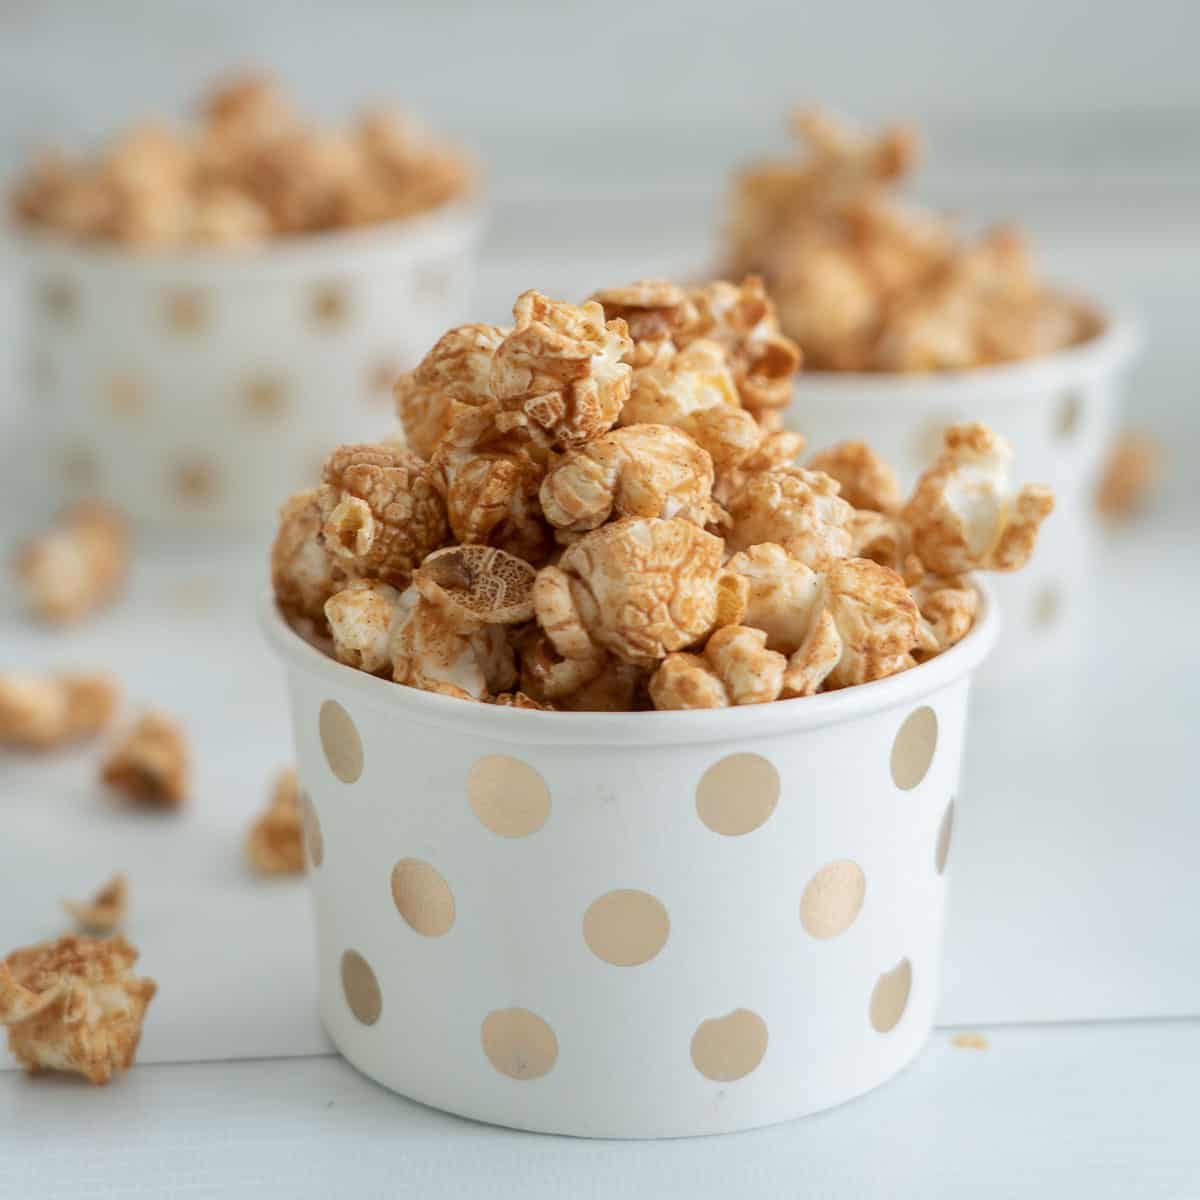 Cinnamon popcorn served in small white paper cups decorated with golden spots.